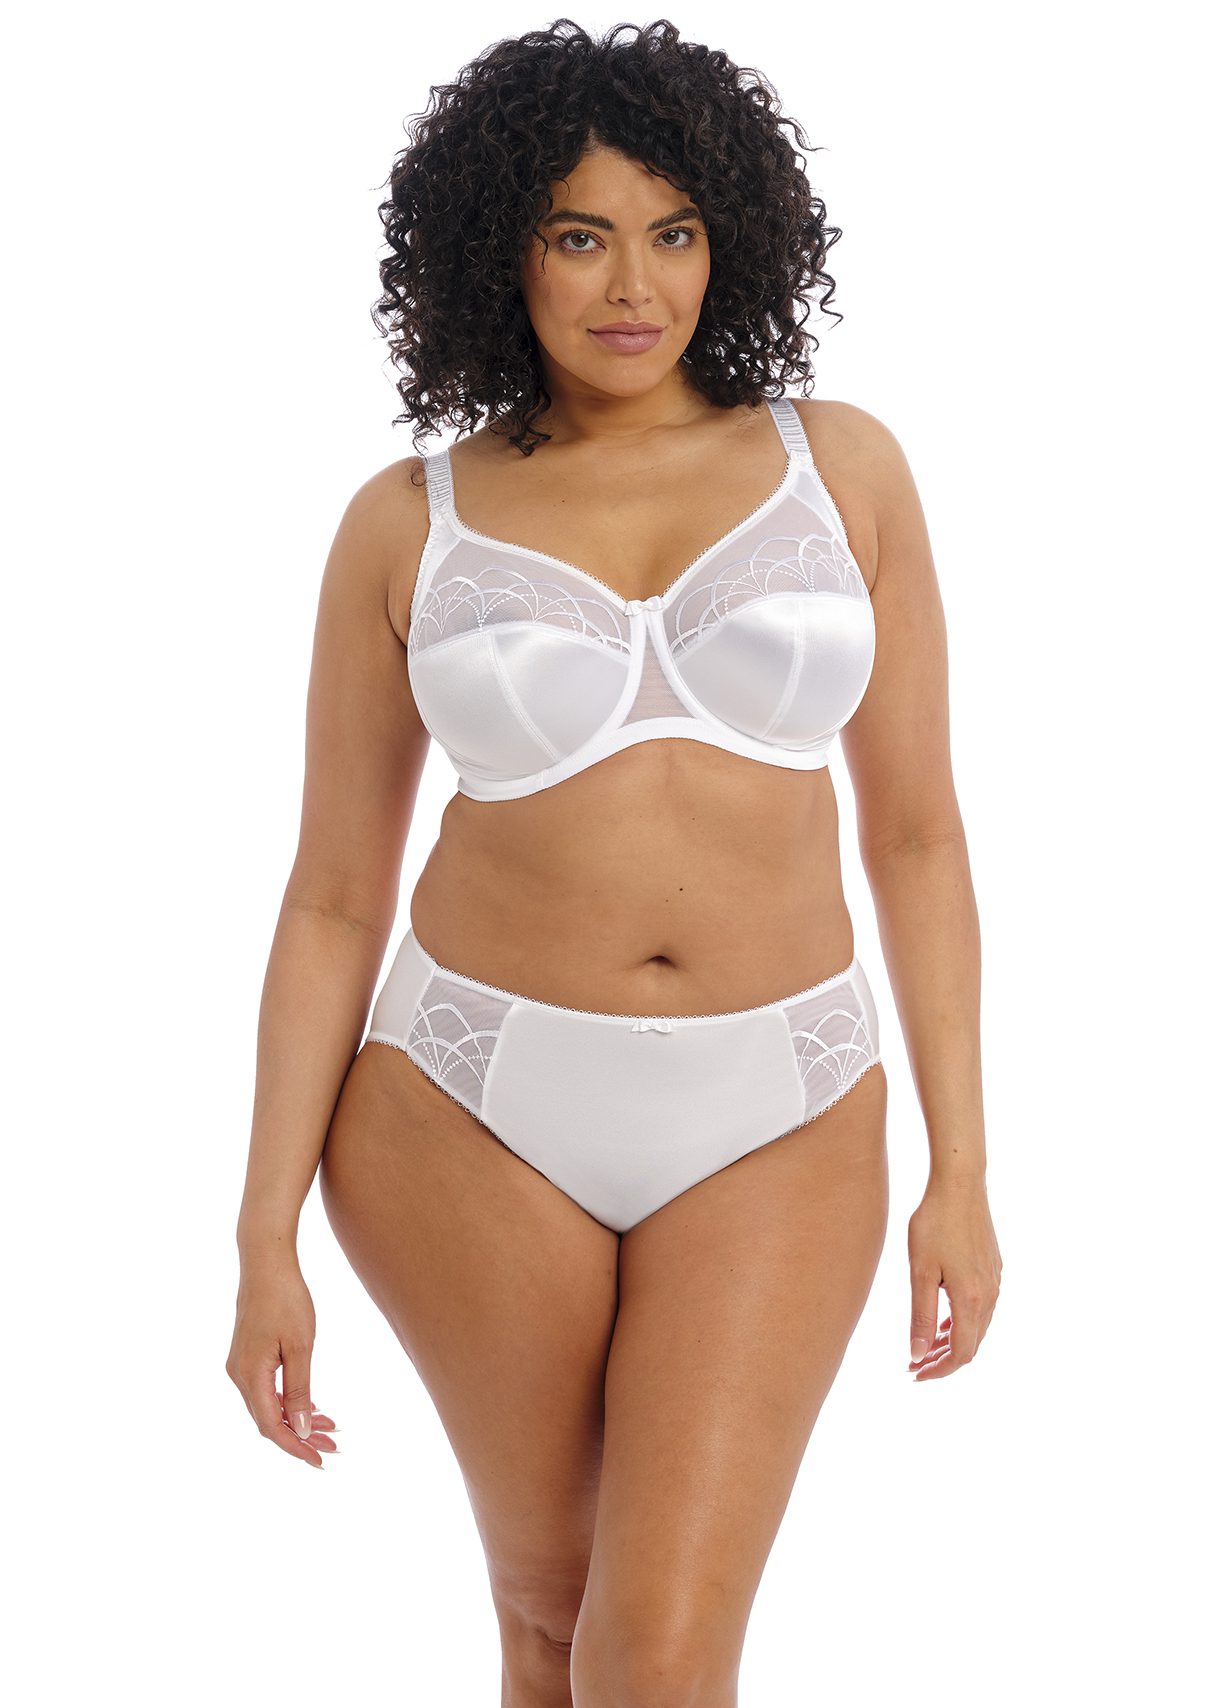 Elomi Cate Style 8030 underwire bra in latte color, size 34G